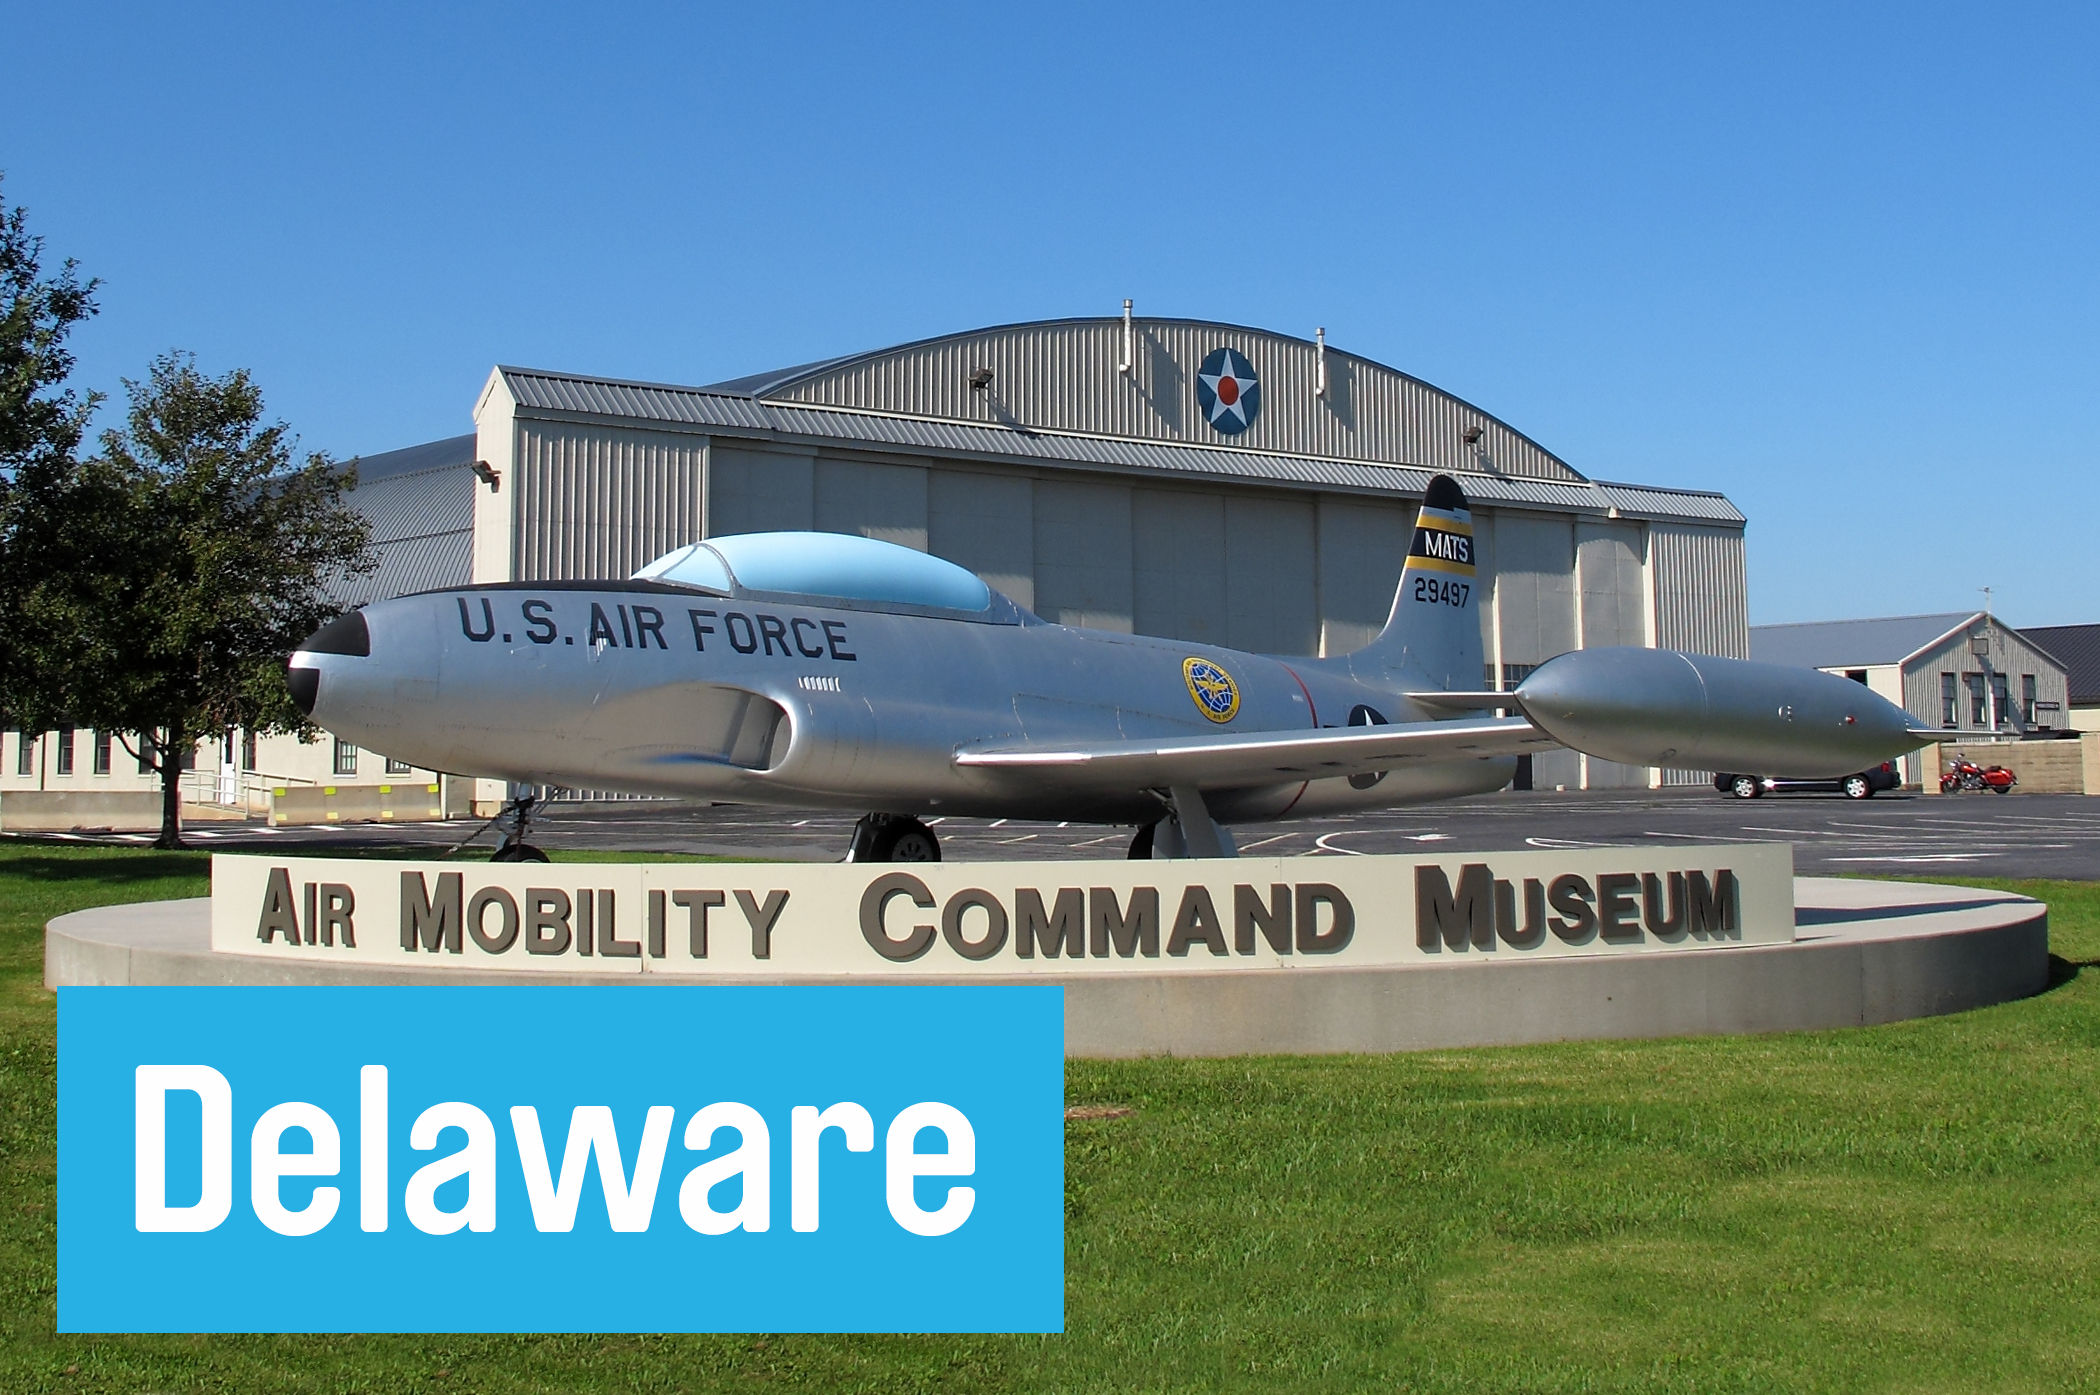 Scope out more than 30 vintage planes and even try a flight simulator at the <a href="http://amcmuseum.org/" target="_blank"> Air Mobility Command Museum</a>, in Dover. See if you can spot the 1951 Stratotanker and the four-passenger Blue Canoe.